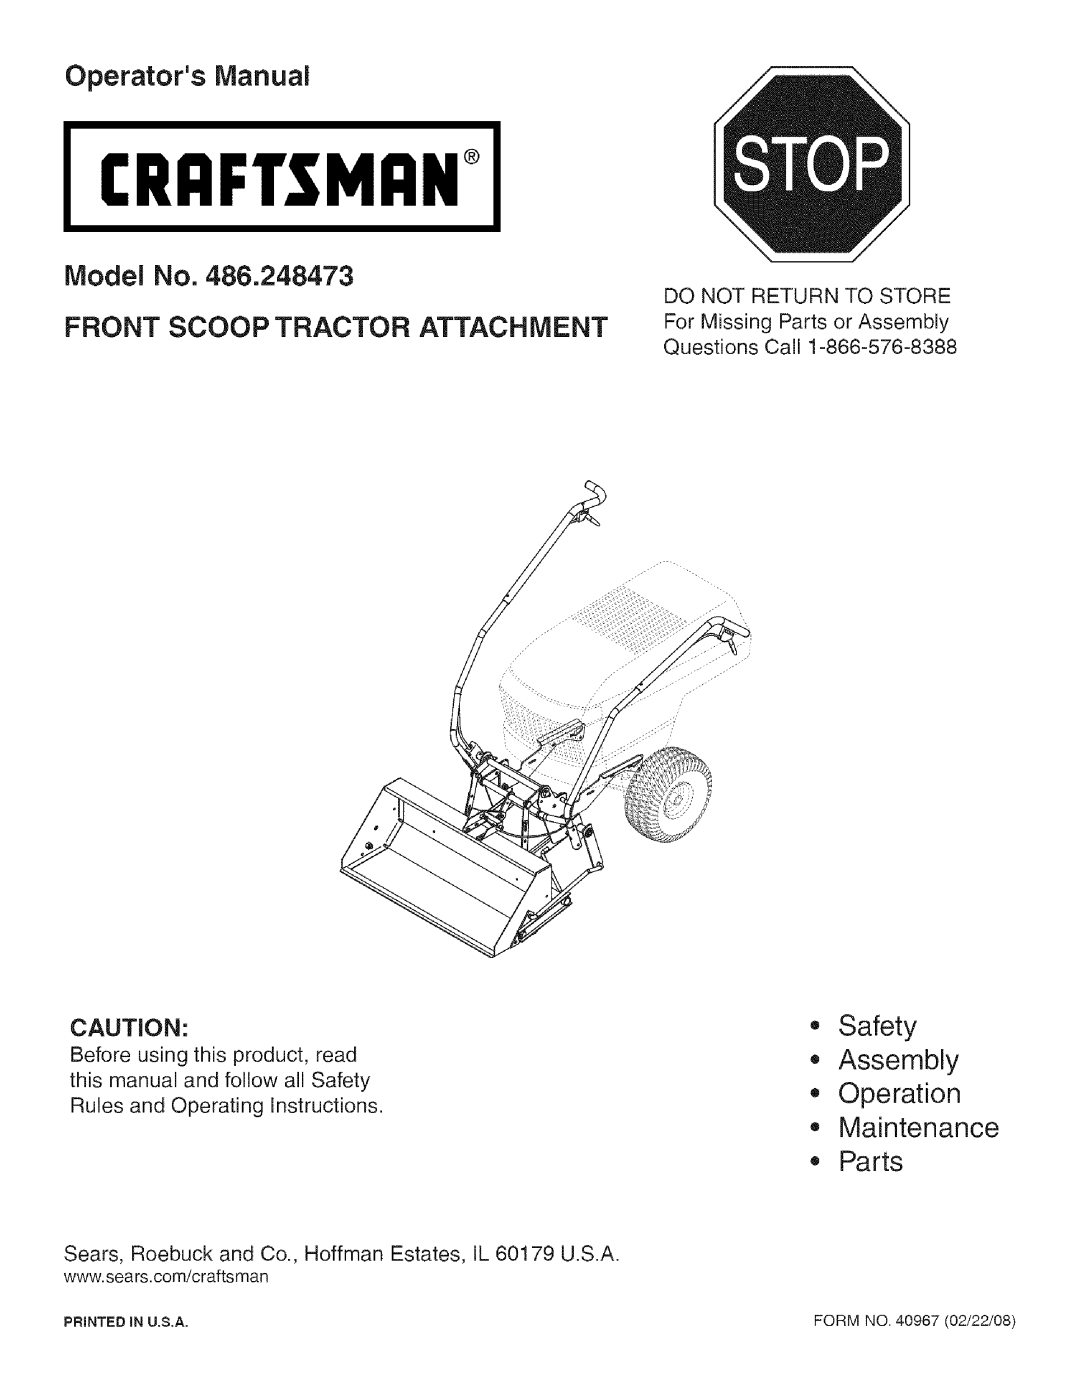 Craftsman 486.248473 manual Model No, Front Scoop Tractor Attachment, Safety Assembly Operation Maintenance Parts 